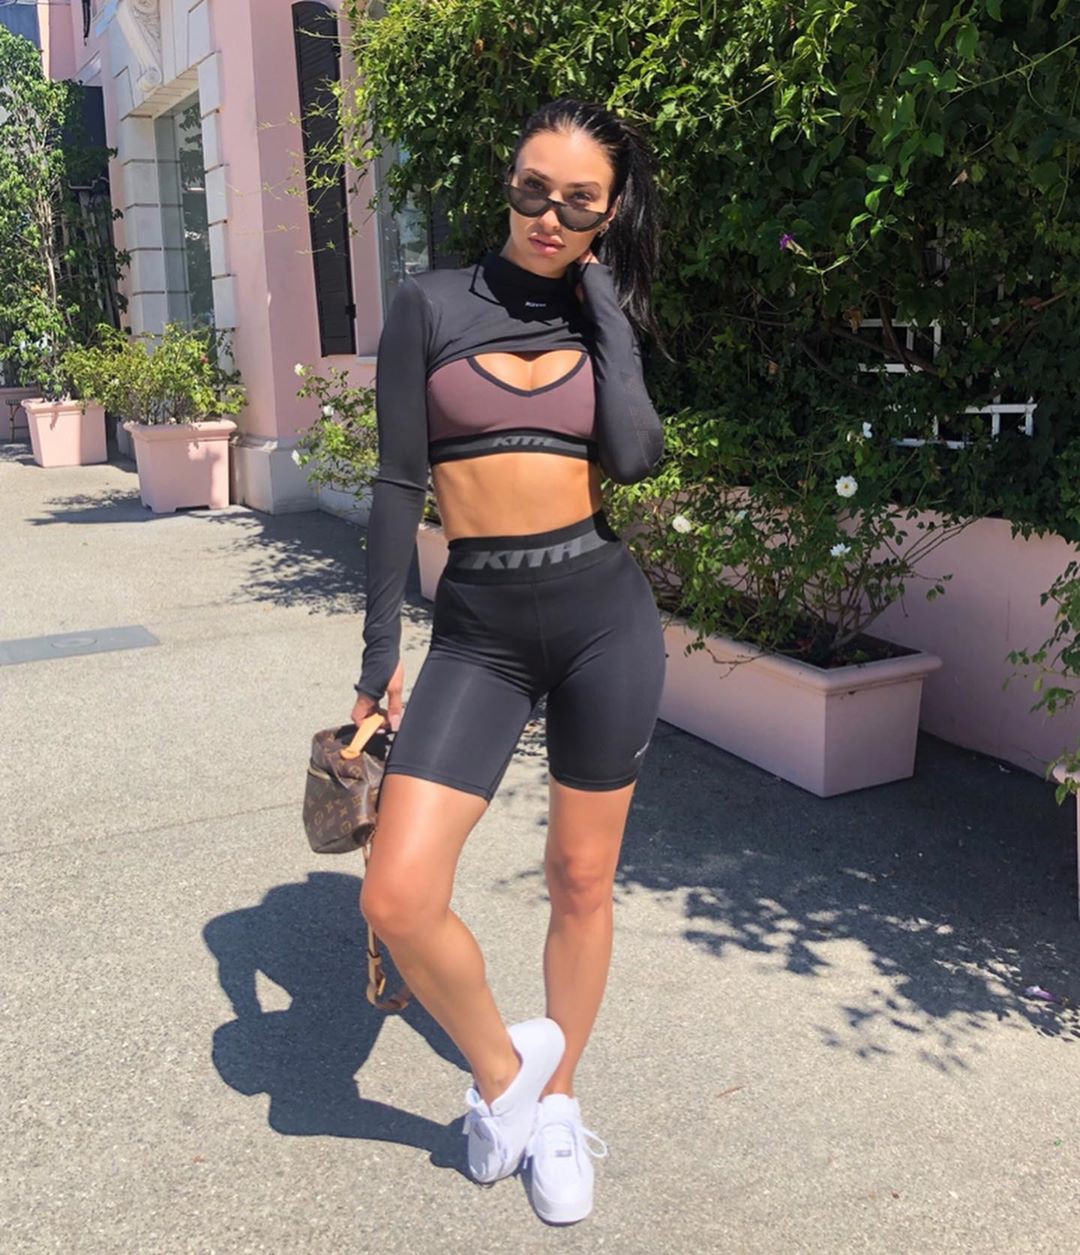 Awesome Outfits Bre Tiesi Snaps: Instagram photos,  Hot Instagram Models,  instagram models,  Bre Tiesi,  most liked Instagram photo,  Hot Bre Tiesi,  Bre Tiesi Instagram  